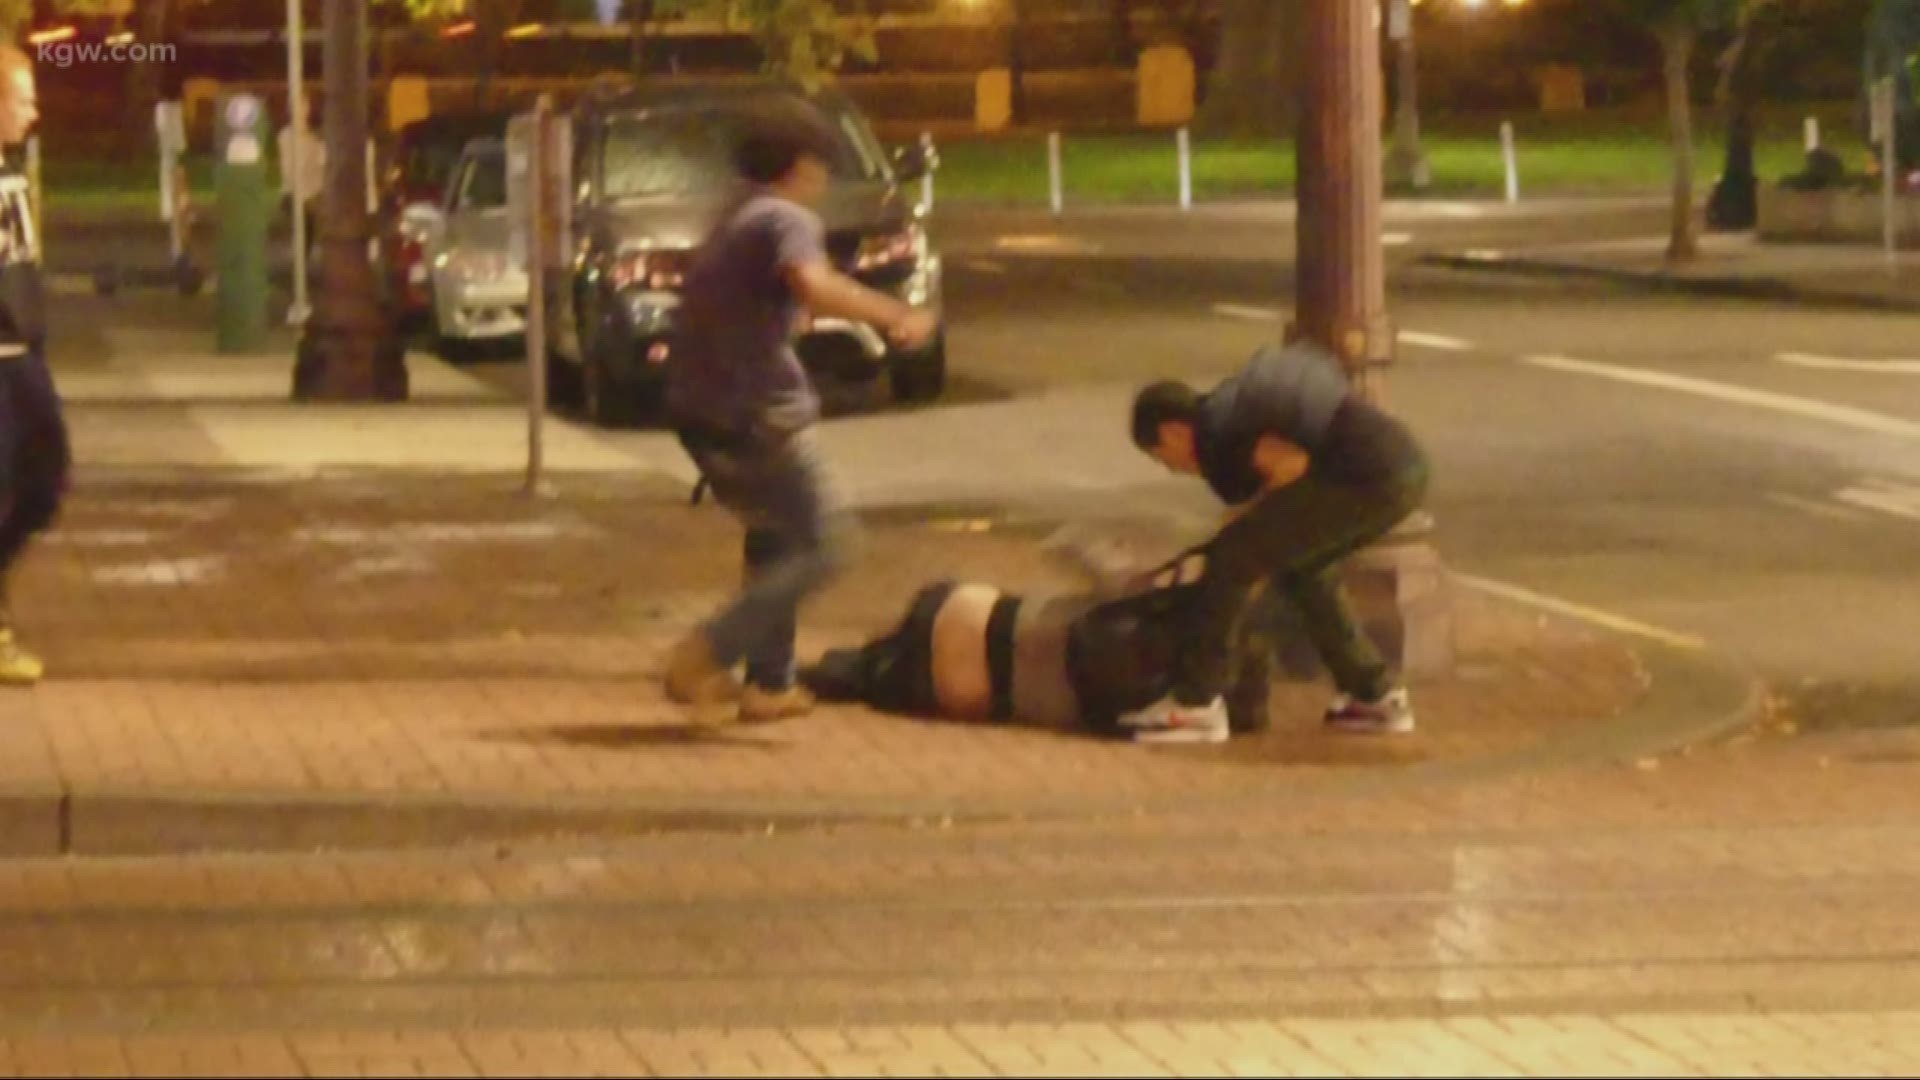 Portland 911 says call concerning homeless man being attacked should have been higher priority